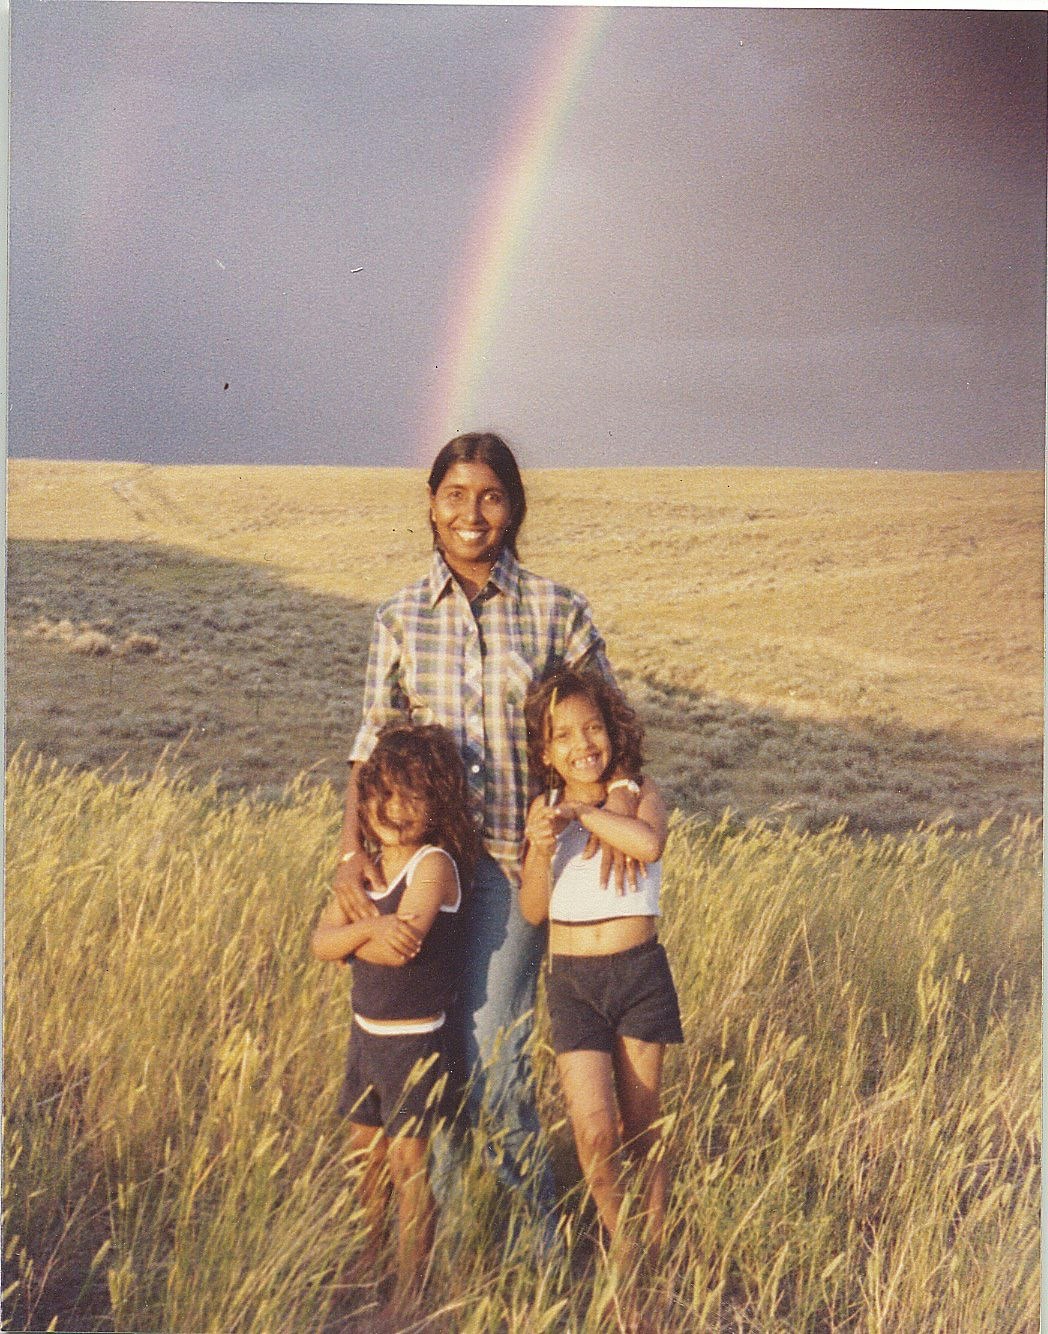 Nina McConigley with her sister when they were children, posing with their mother on the high plains of Wyoming